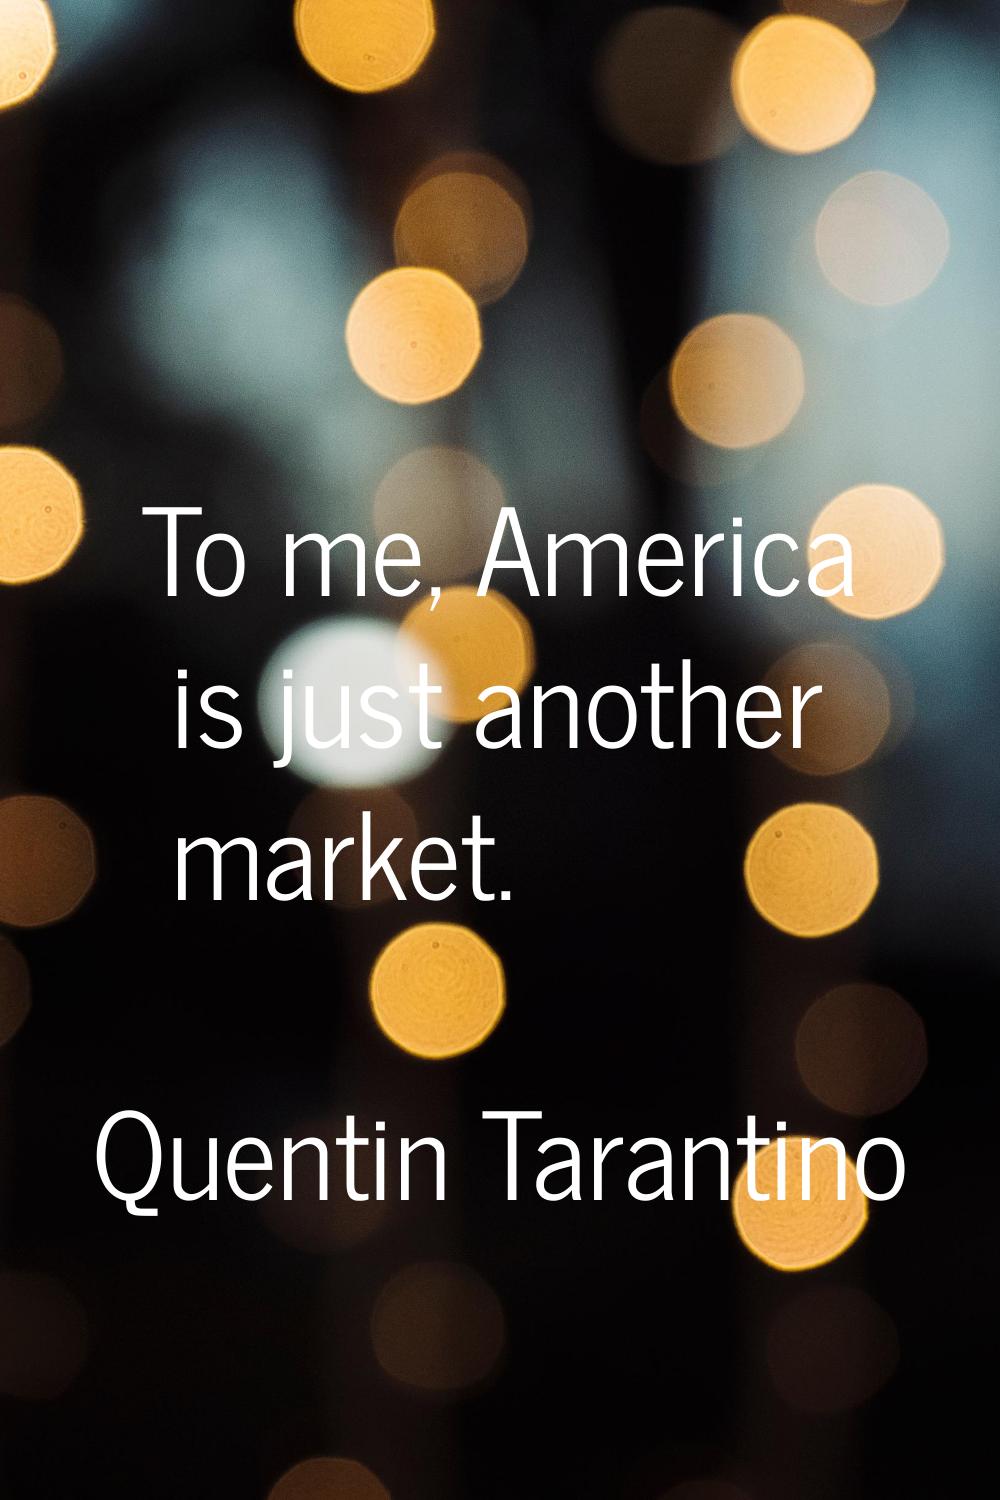 To me, America is just another market.